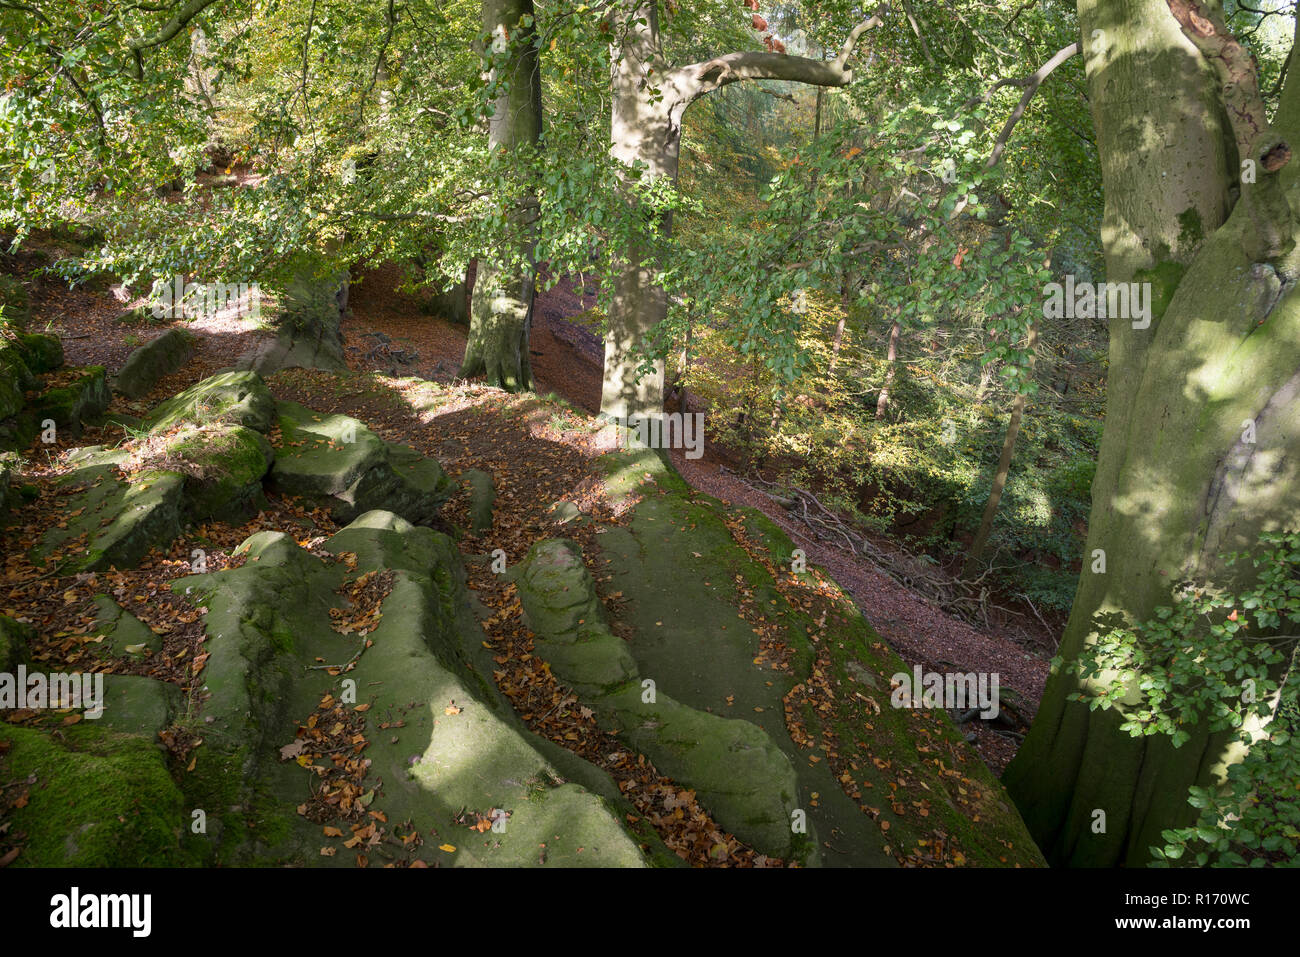 Autumn at Alderley Edge in the Cheshire countryside, England. Stock Photo